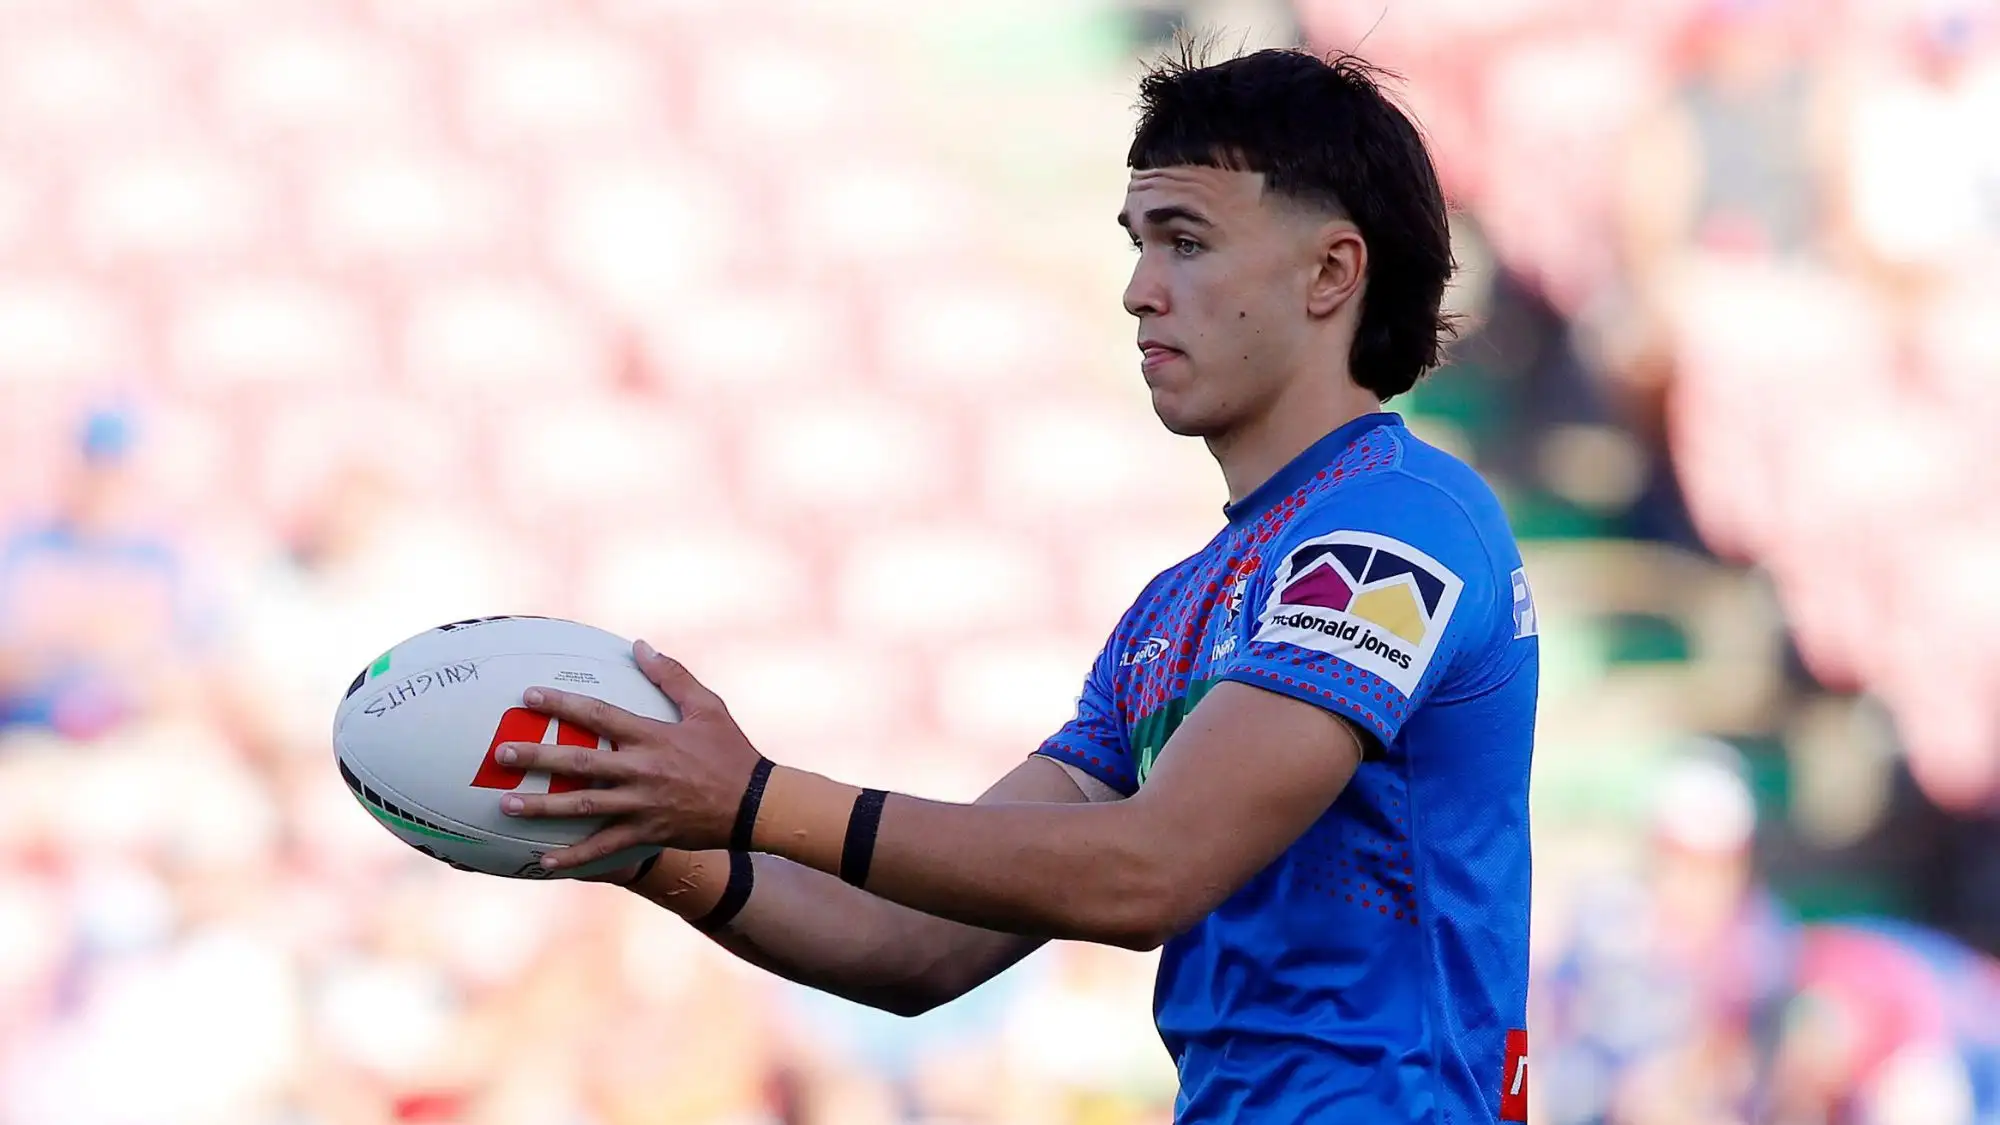 NRL starlet signs for Championship club Toulouse Olympique on two-year contract